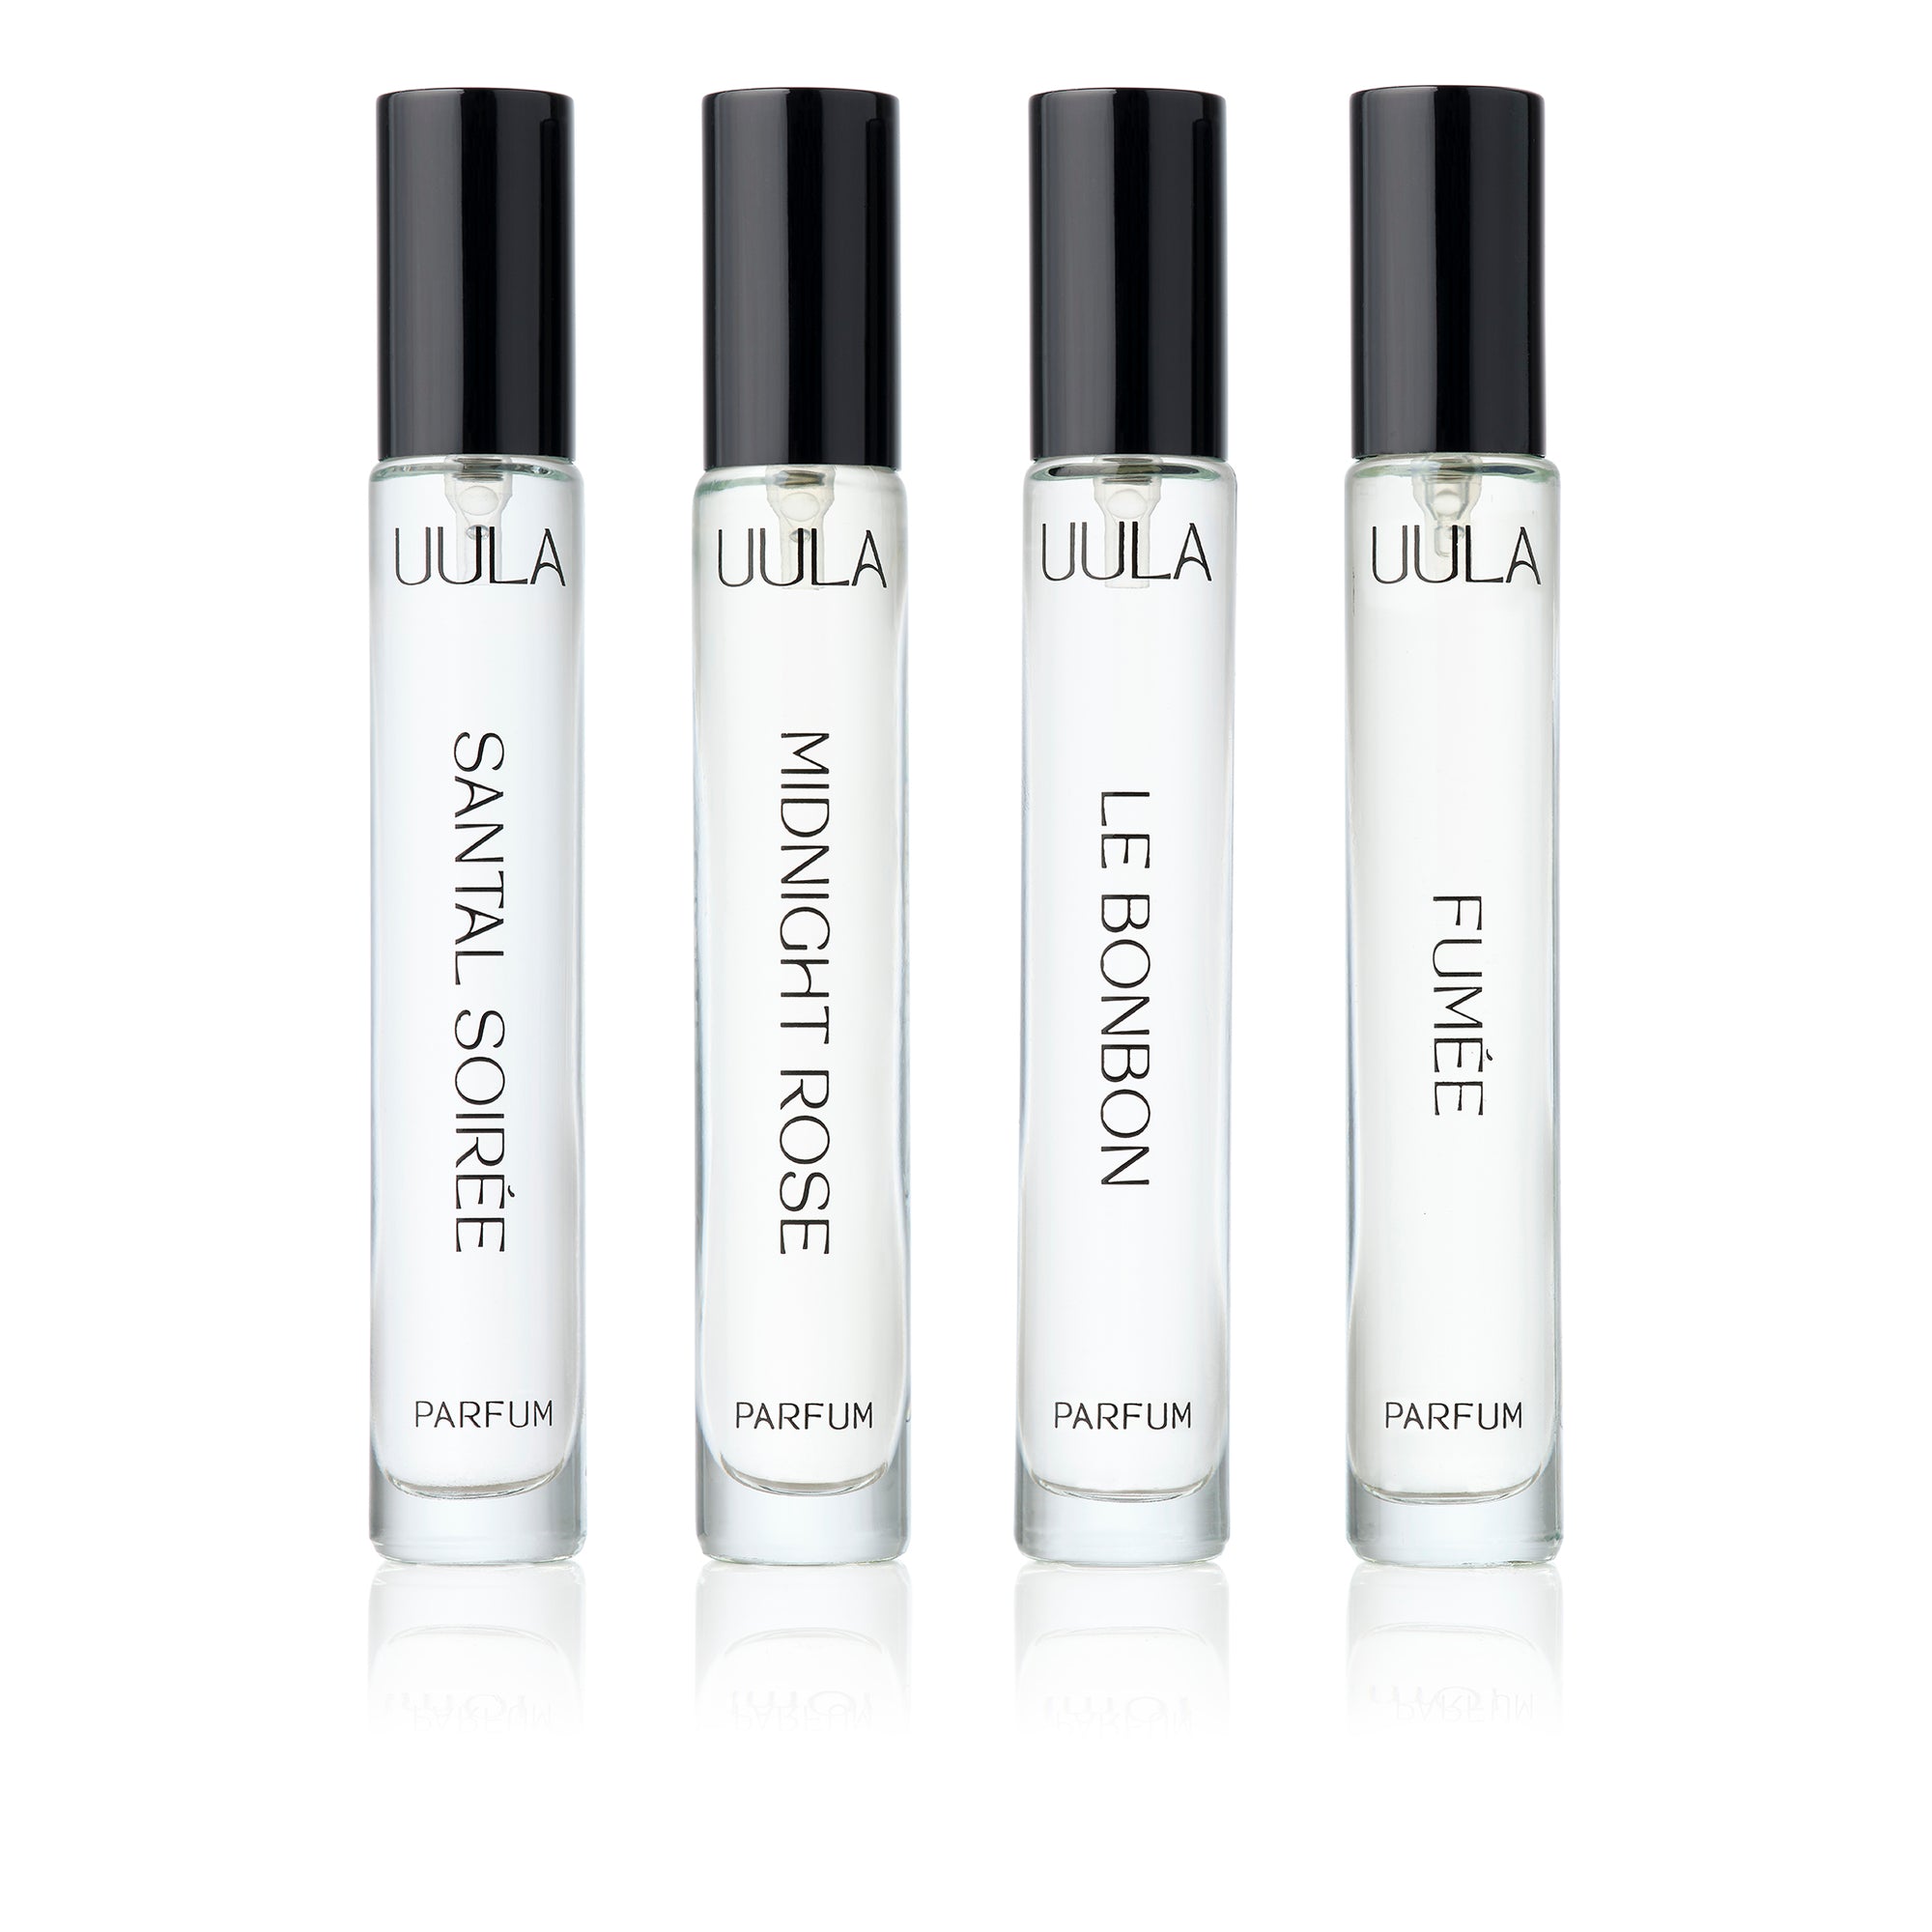 UULA Travel Collection fragrance set with four 10 ml bottles neatly presented. The bottles represent a perfume passport, offering scents for different occasions, from exotic sunsets and sophisticated evenings to starlit adventures and joyous moments.